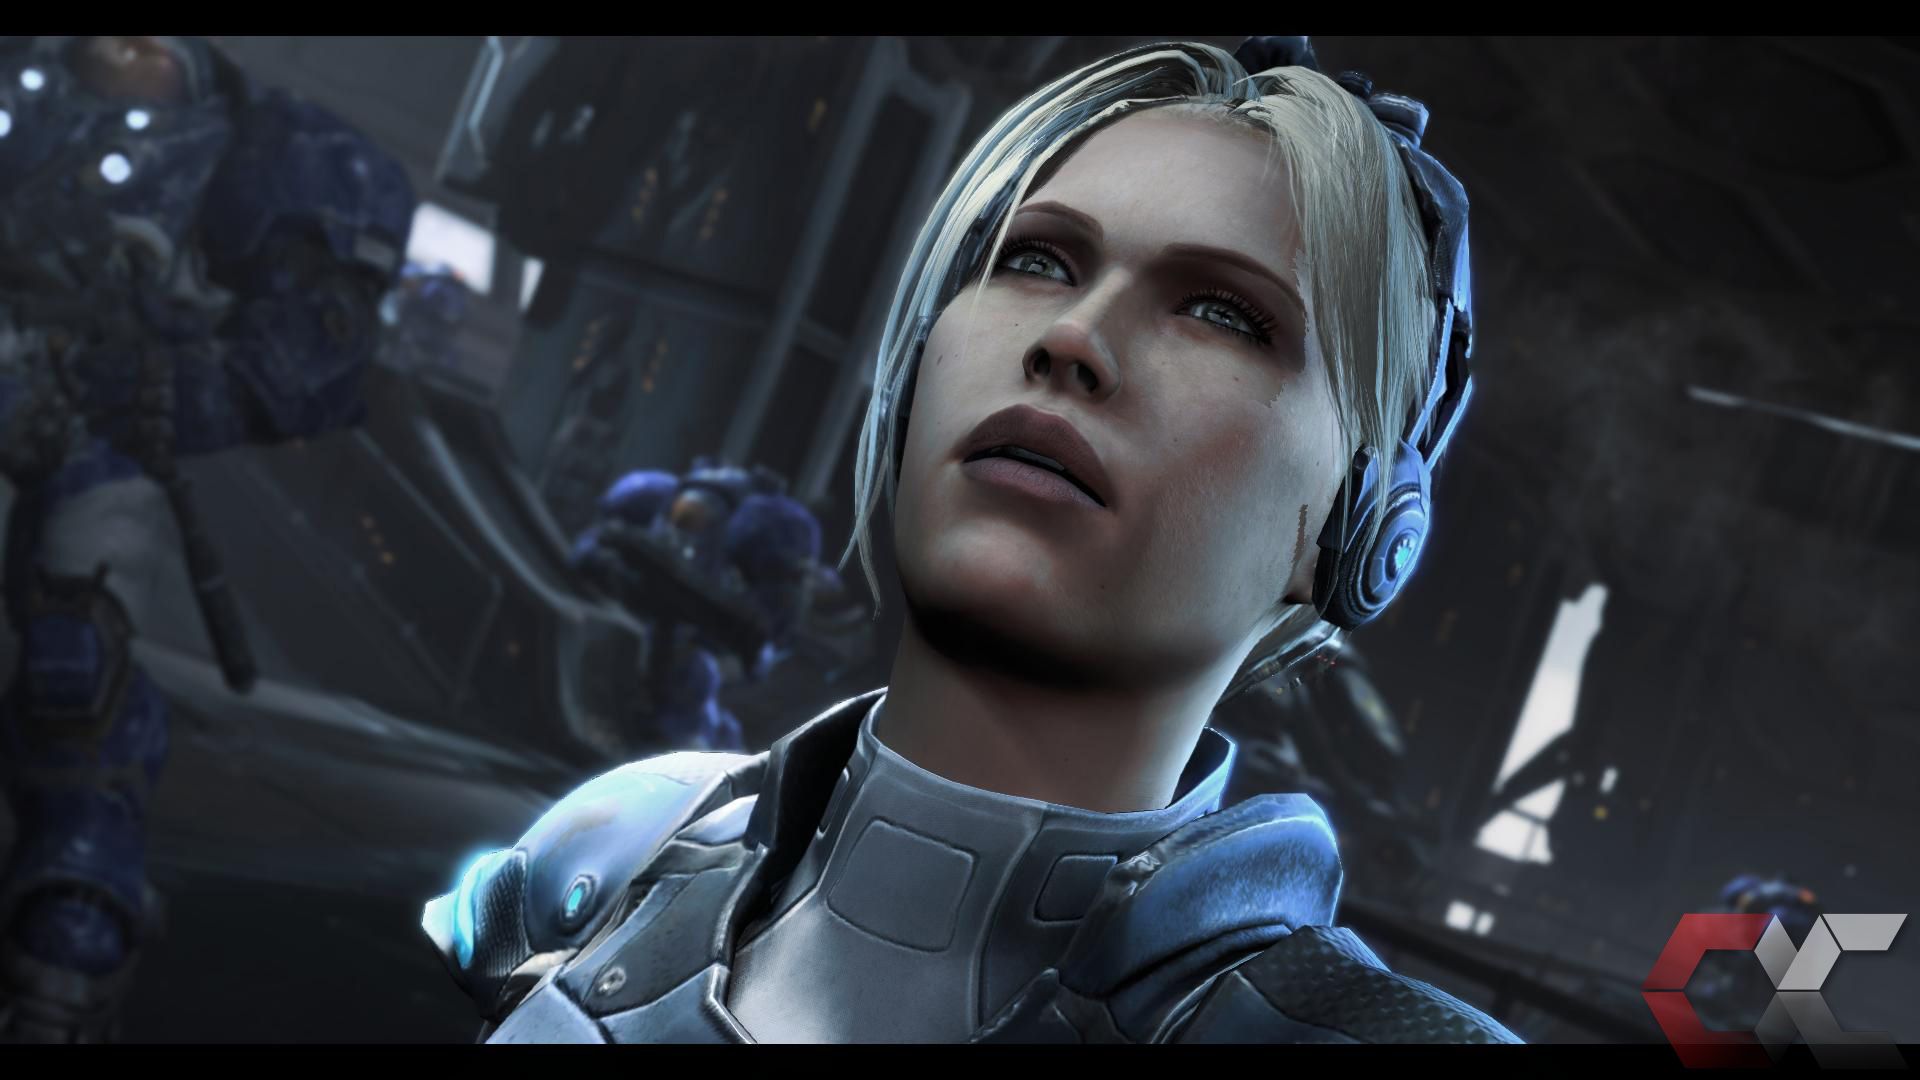 Image Starcraft II Nova Coverts Ops OverCluster in Review Nova Covert Ops a...